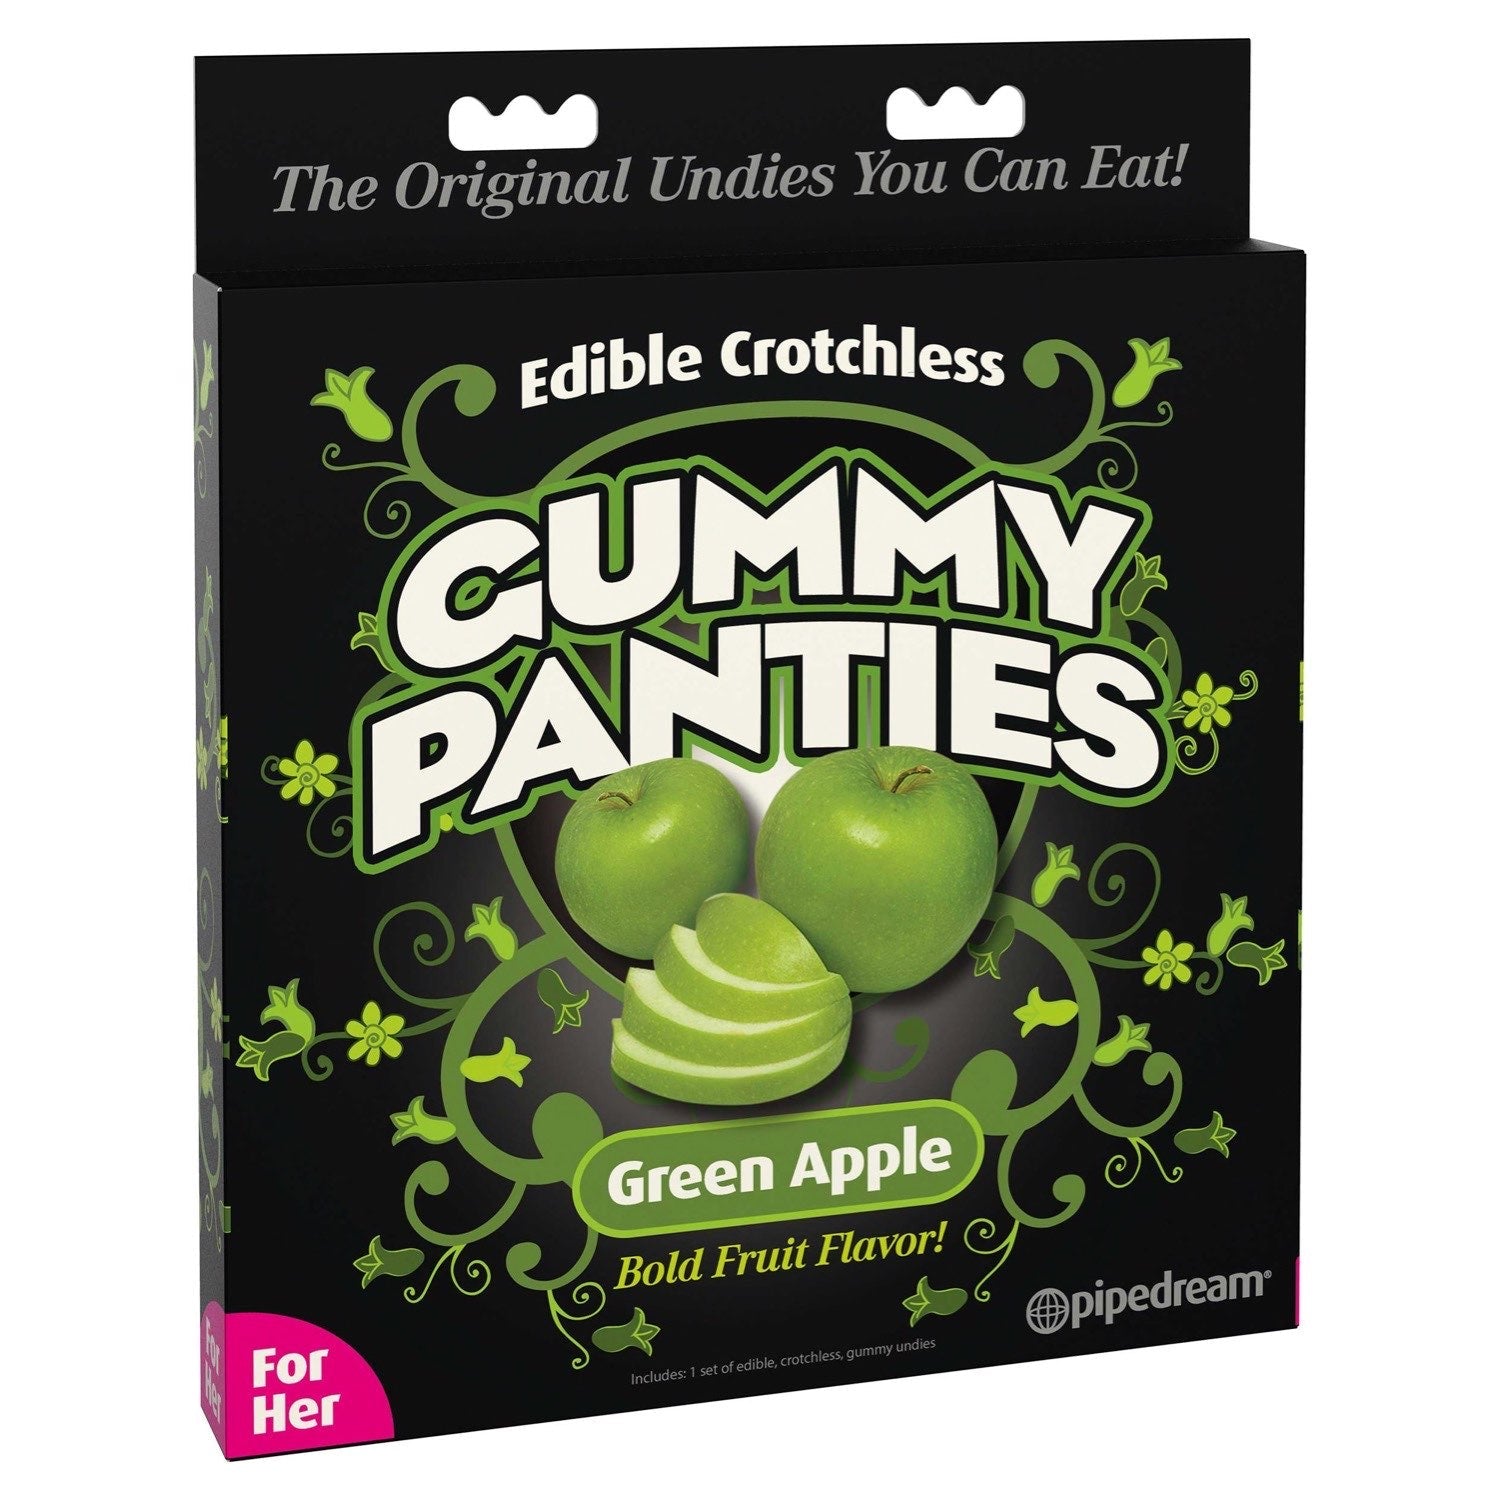  Gummy Panties - Green Apple Flavoured Edible Crotchless Panties by Pipedream